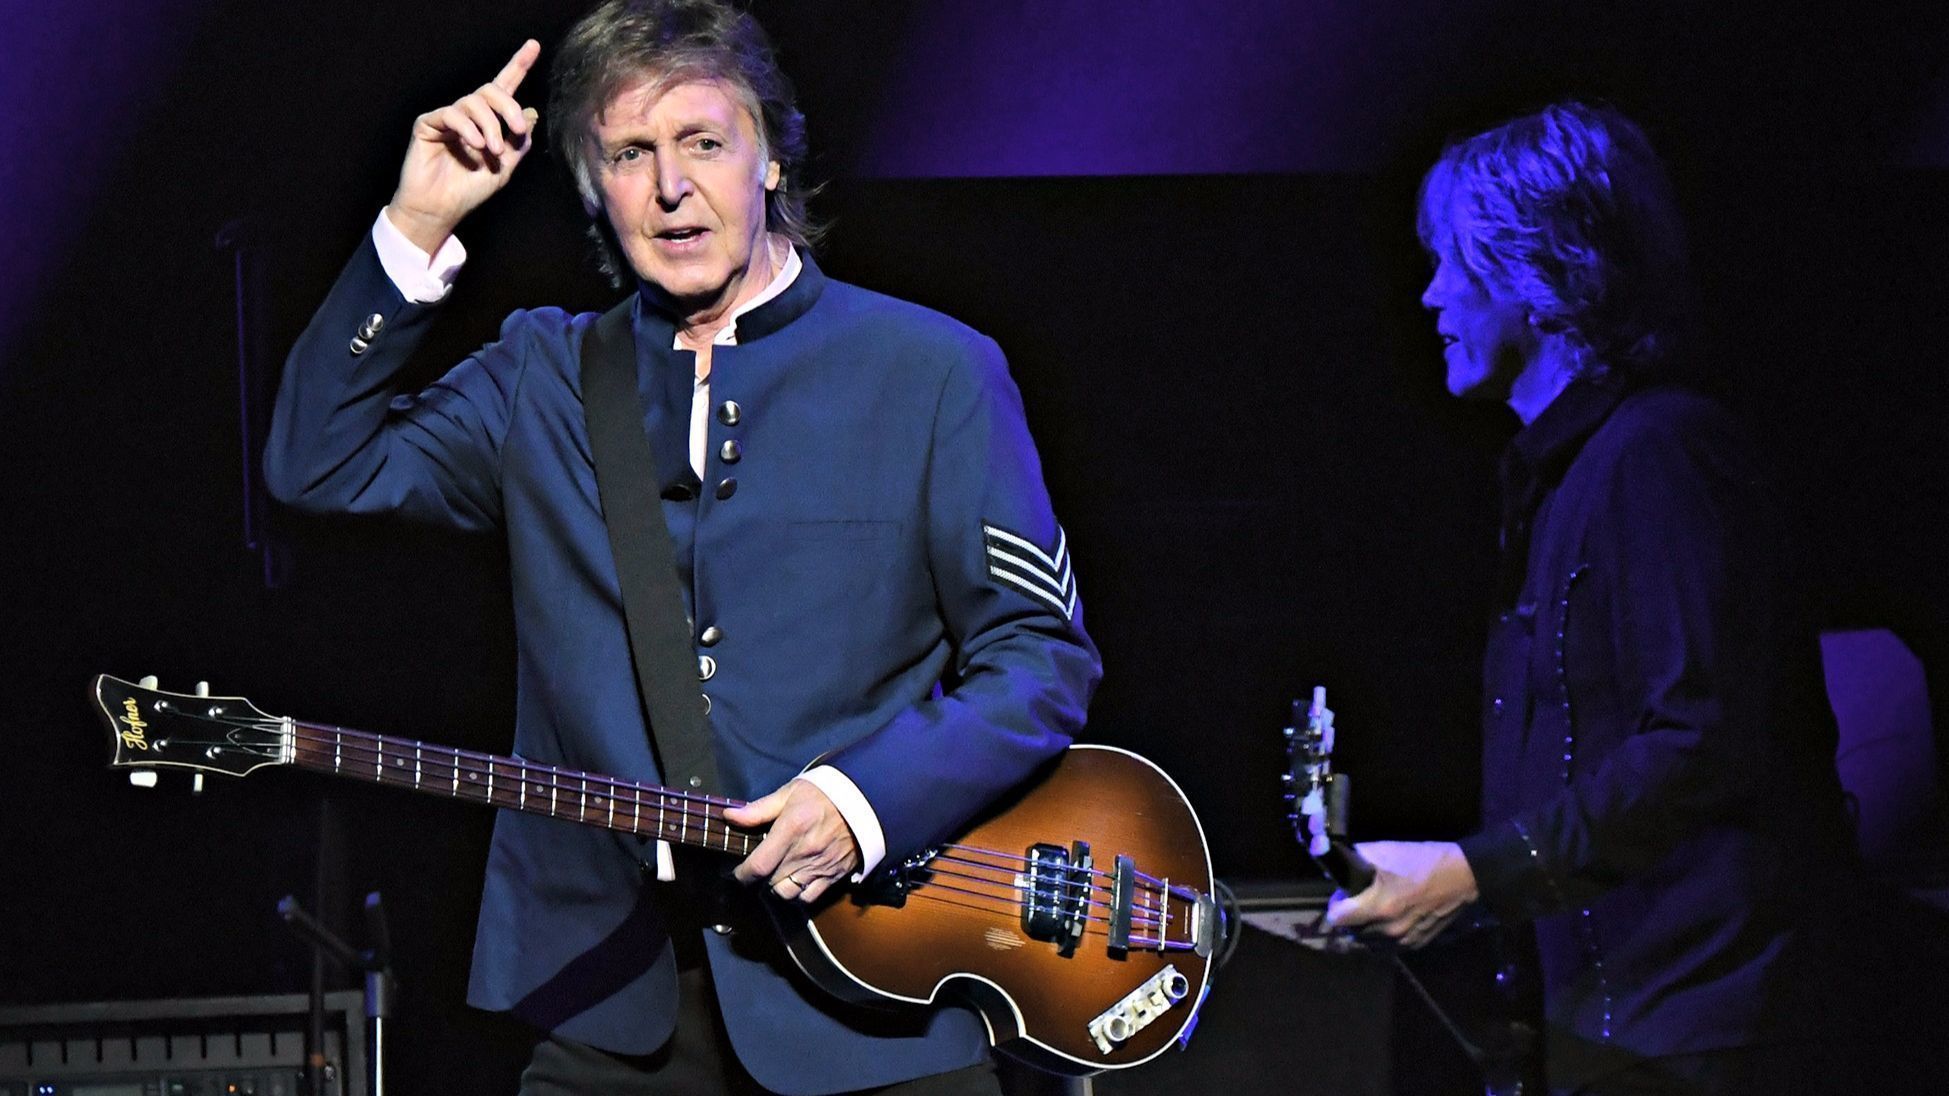 Watch Paul McCartney singing Give Peace a Chance as a tribute to Vegas